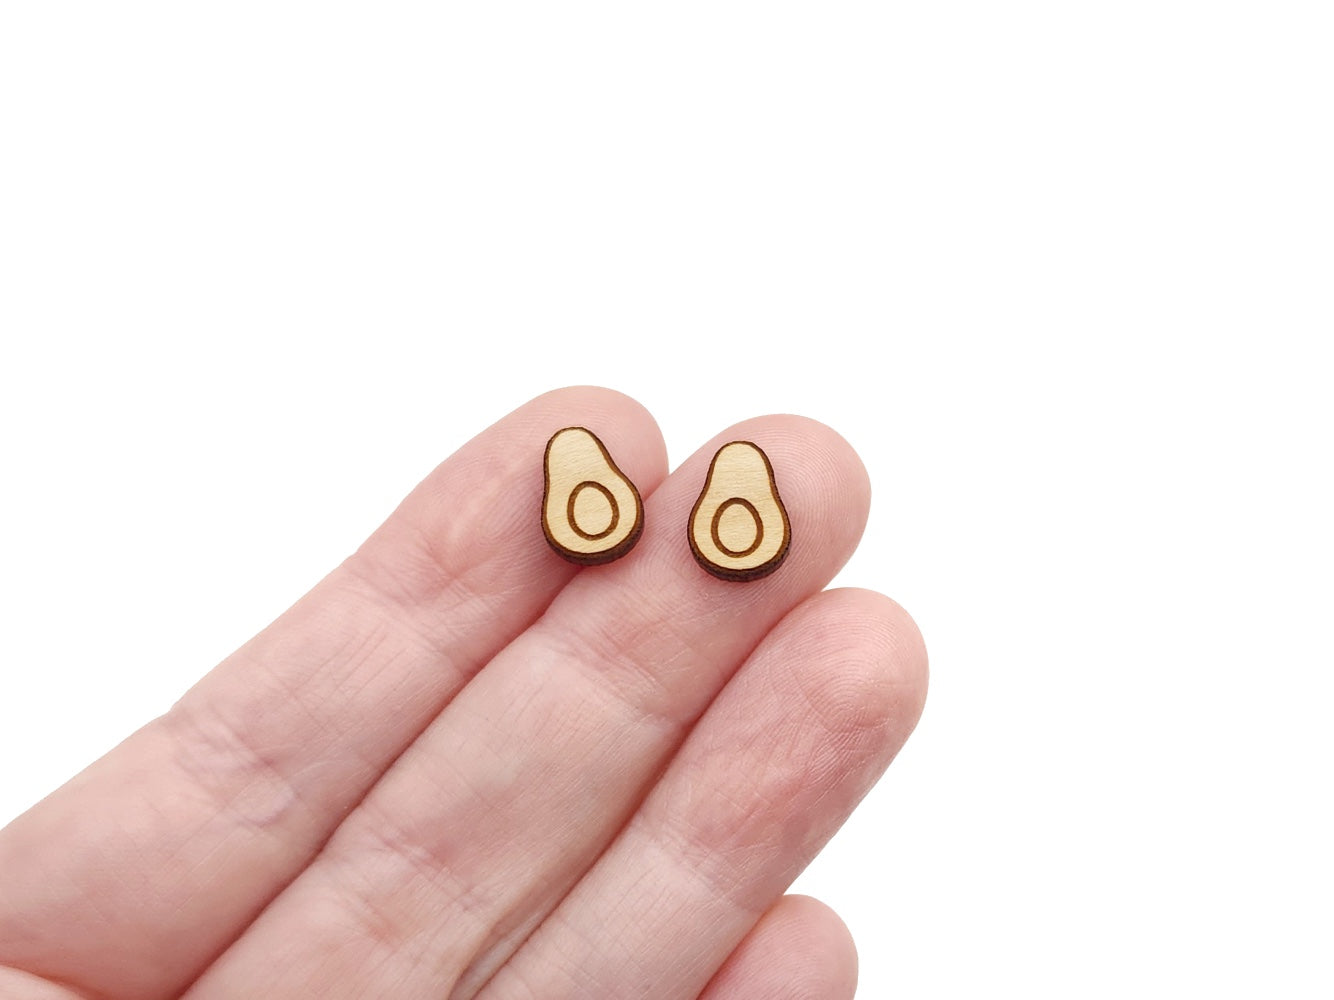 a hand holding a pair of wooden cabochon stud earring blanks cut and engraved to look like an avocado